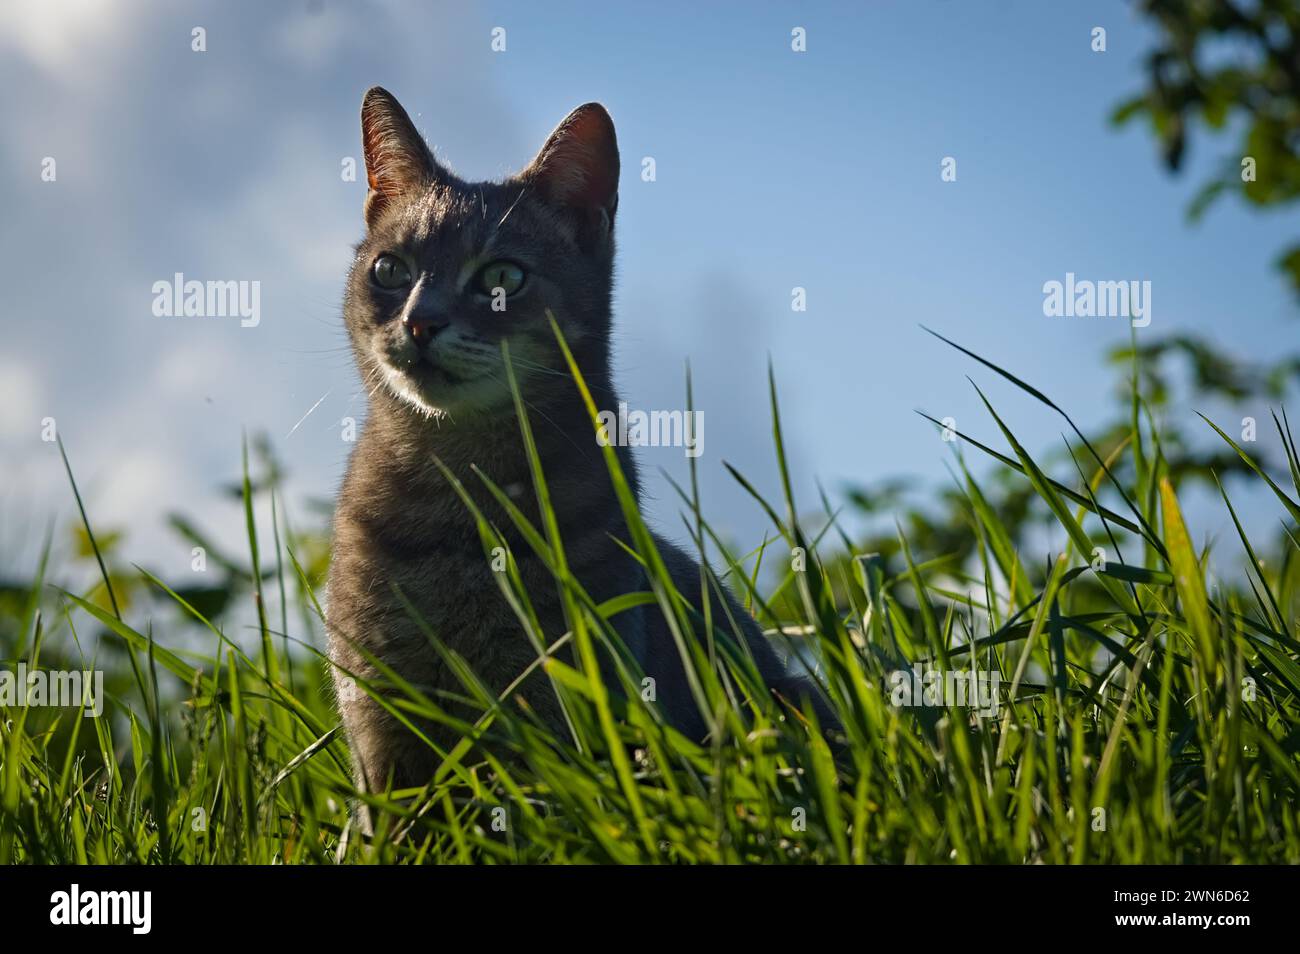 a tabby cat with green eyes sitting in long grass with sun flare Stock Photo